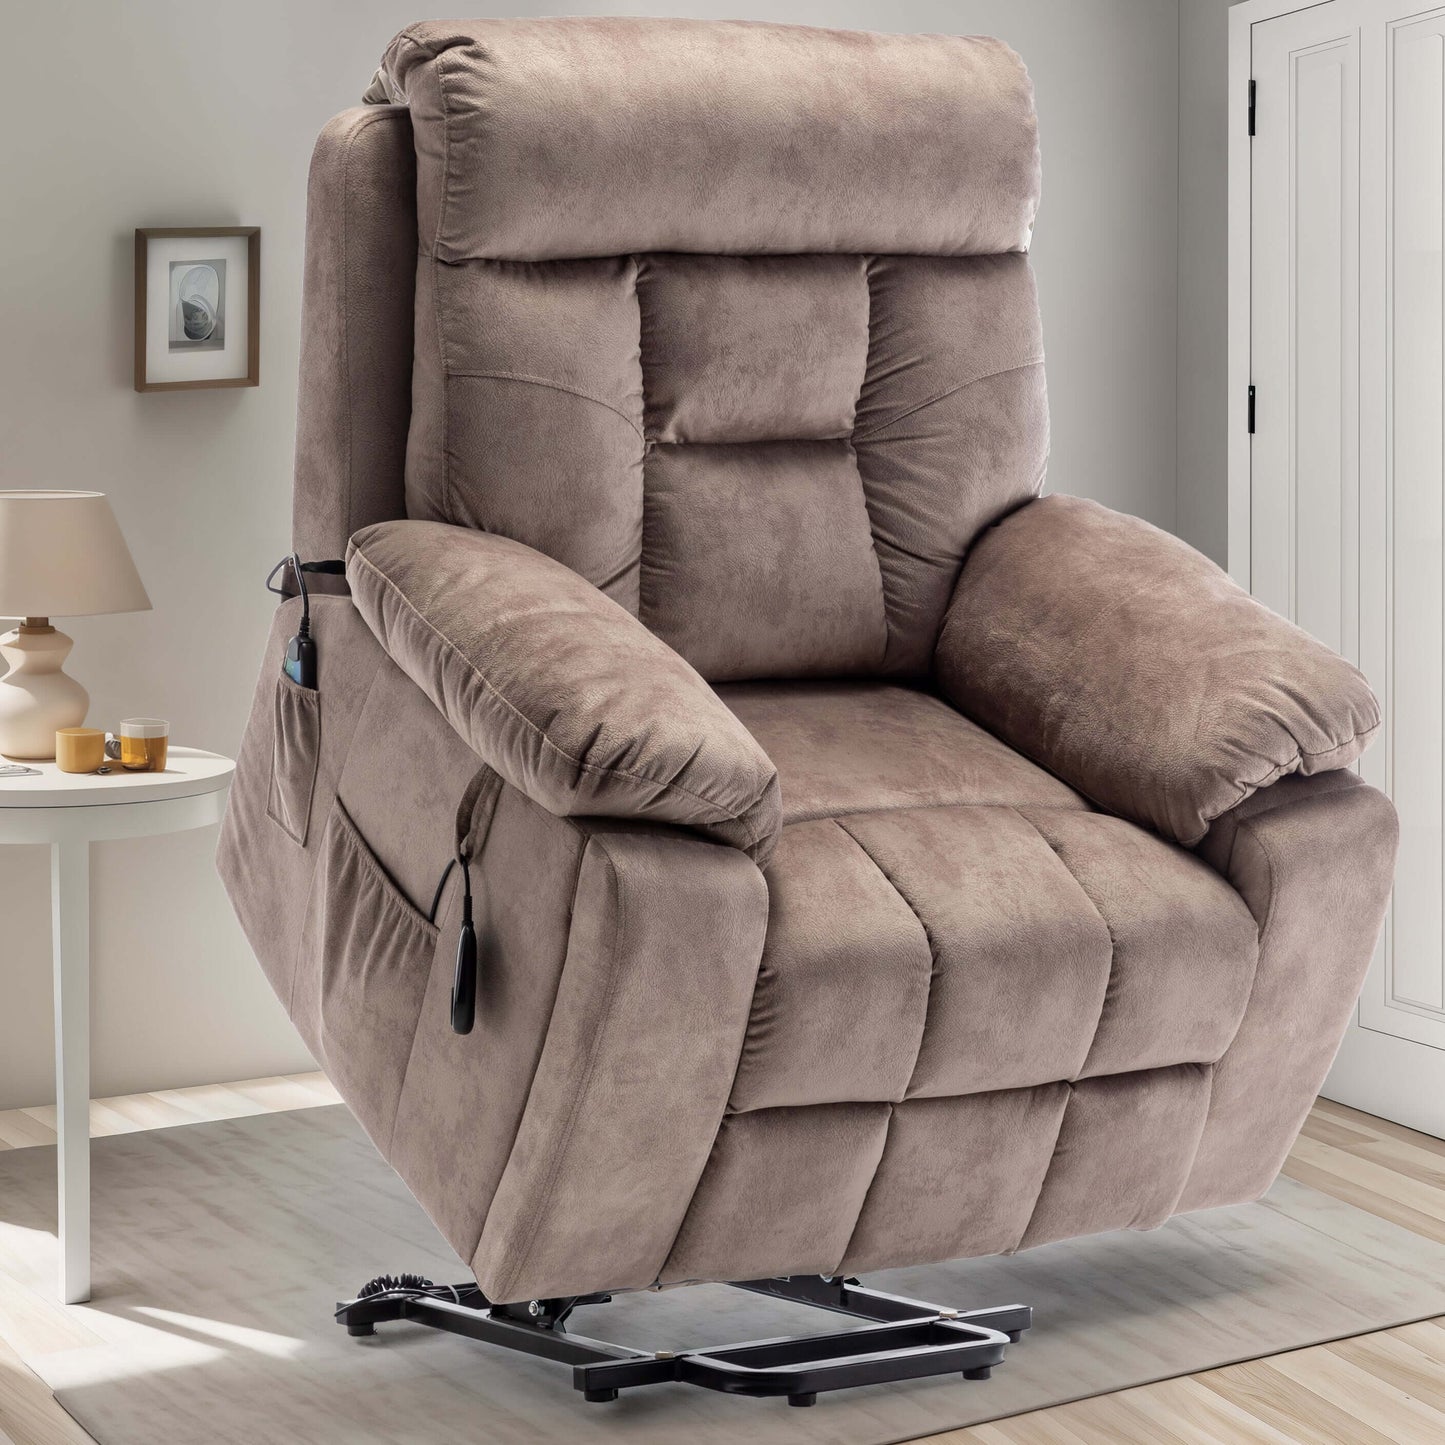 lift chairs recliners for elderly